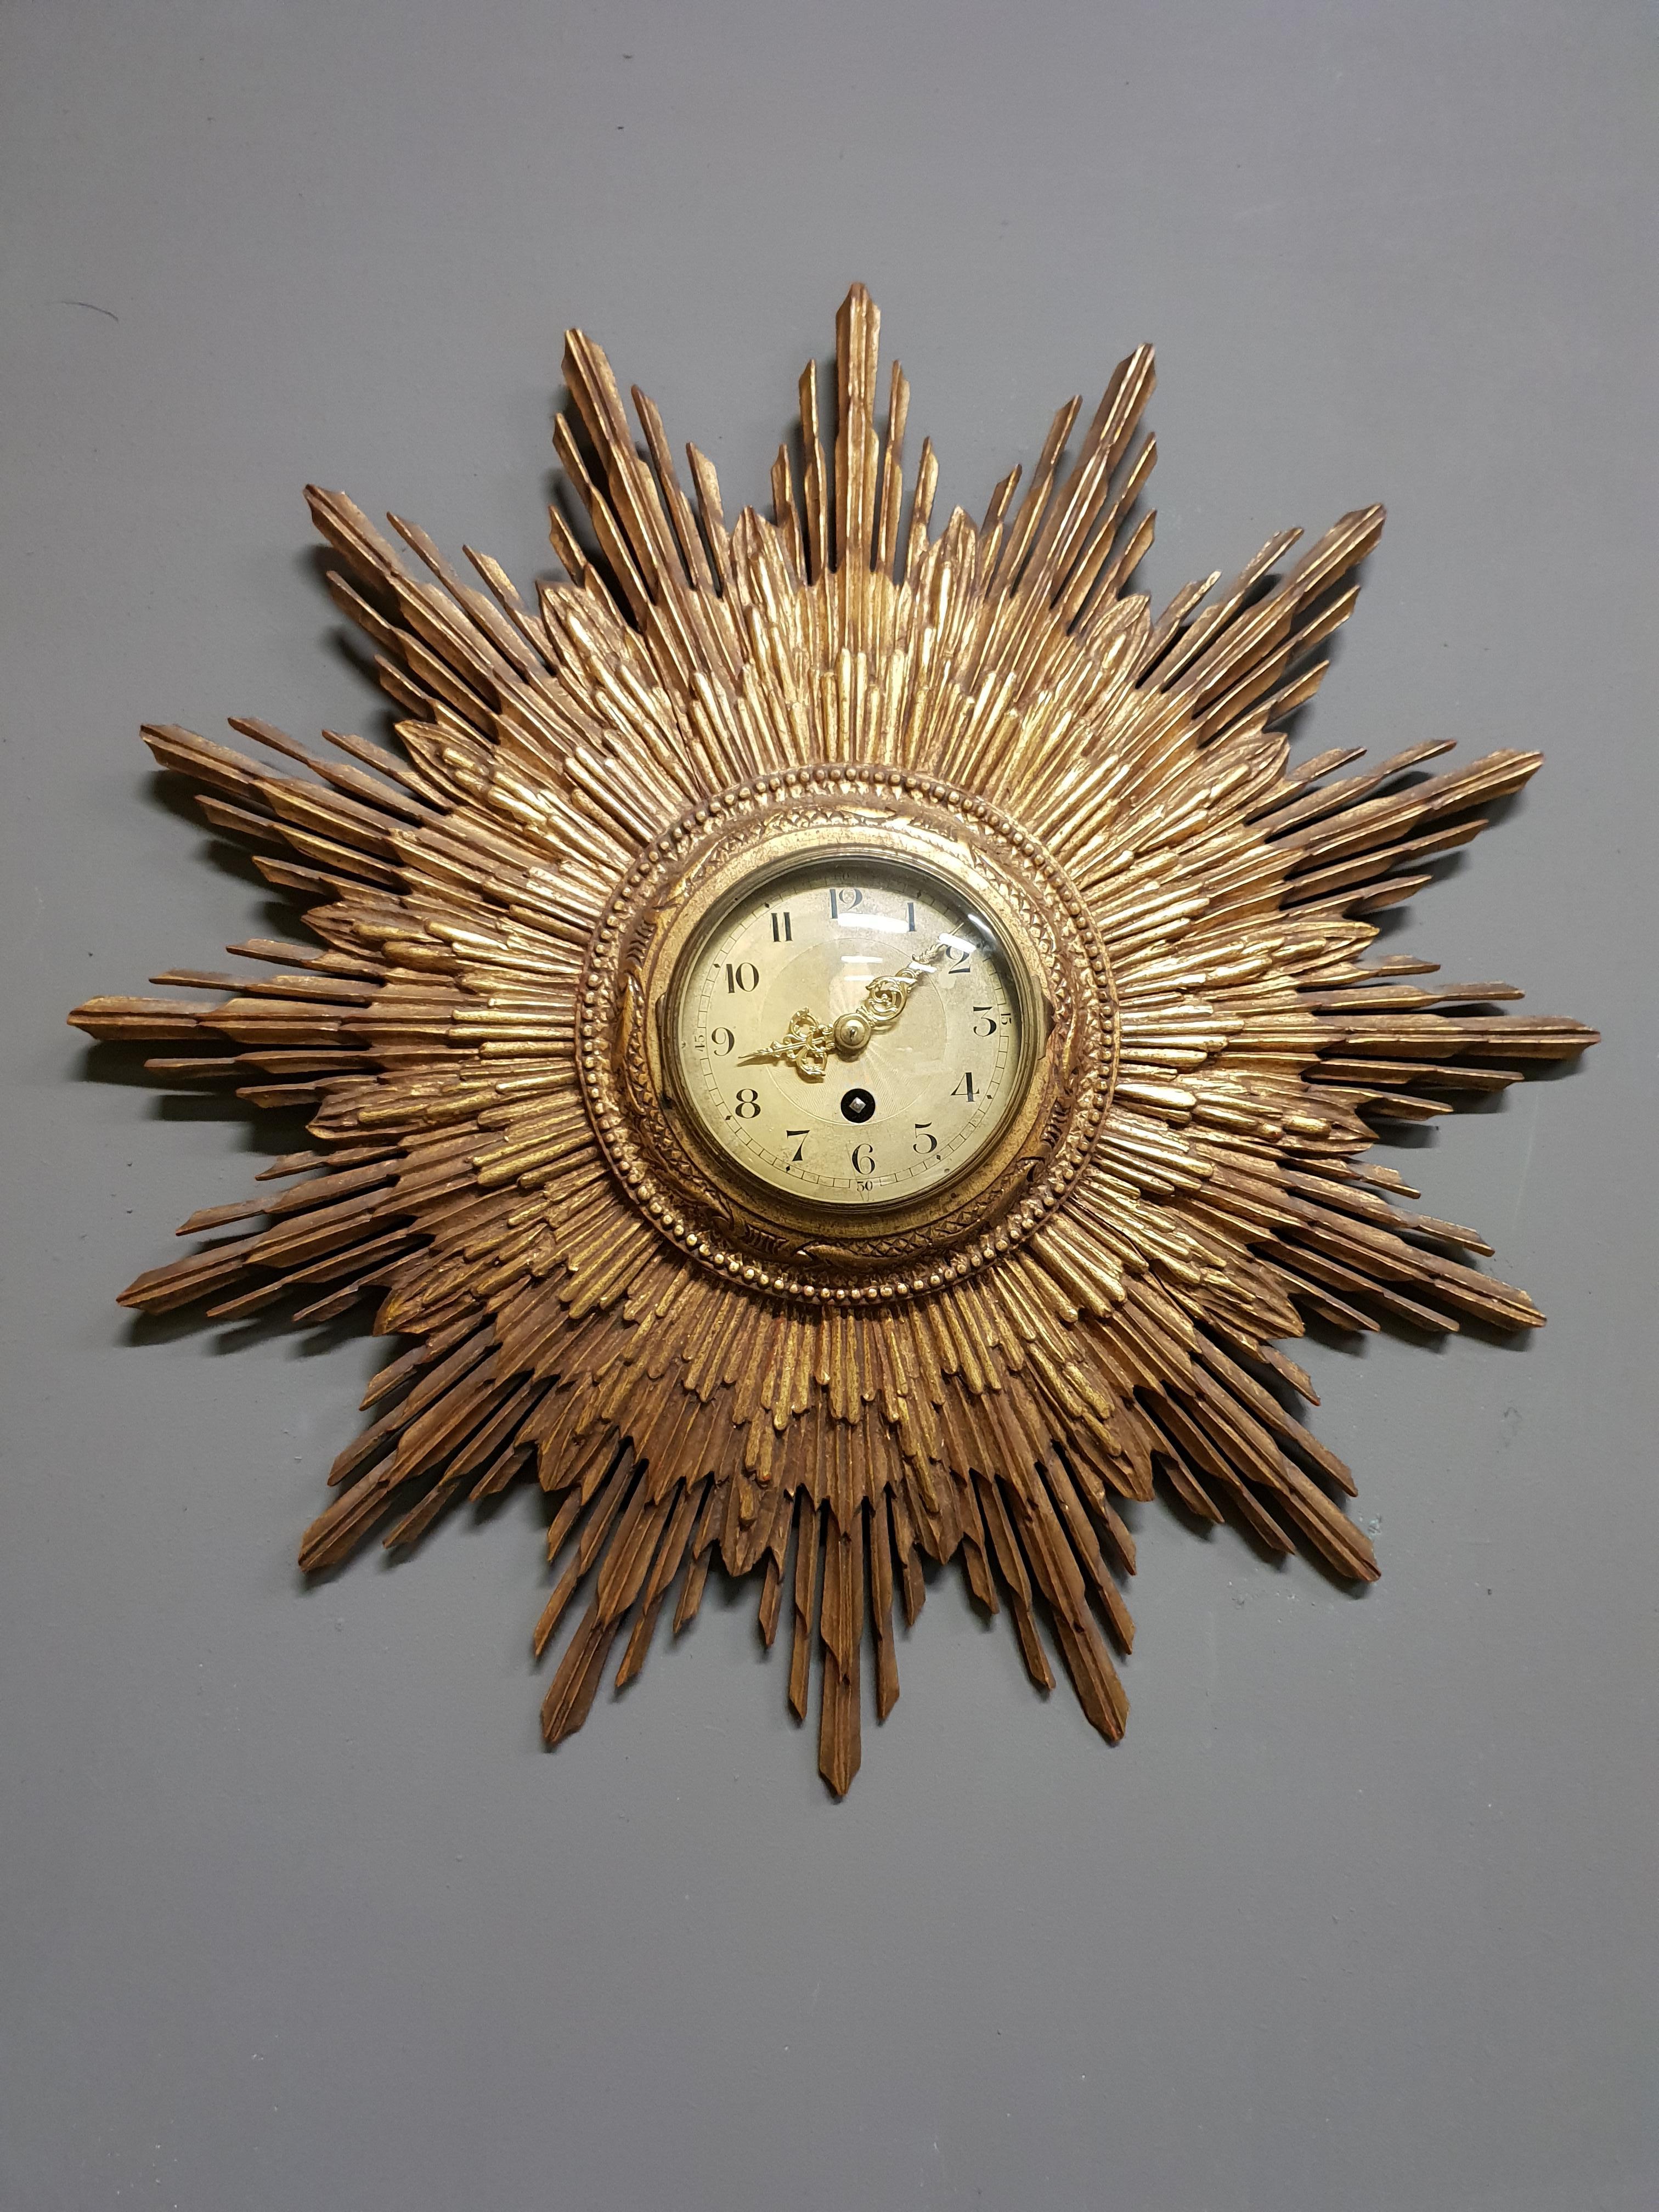 A mindblowing radiant sunburst clock by the French clockmaker Japy Frères, circa 1920.
This impressive and functional wall sculpture is made out of gilded carved wood.
A true piece of art.
The clock is engraved with the Japy Frères brand and